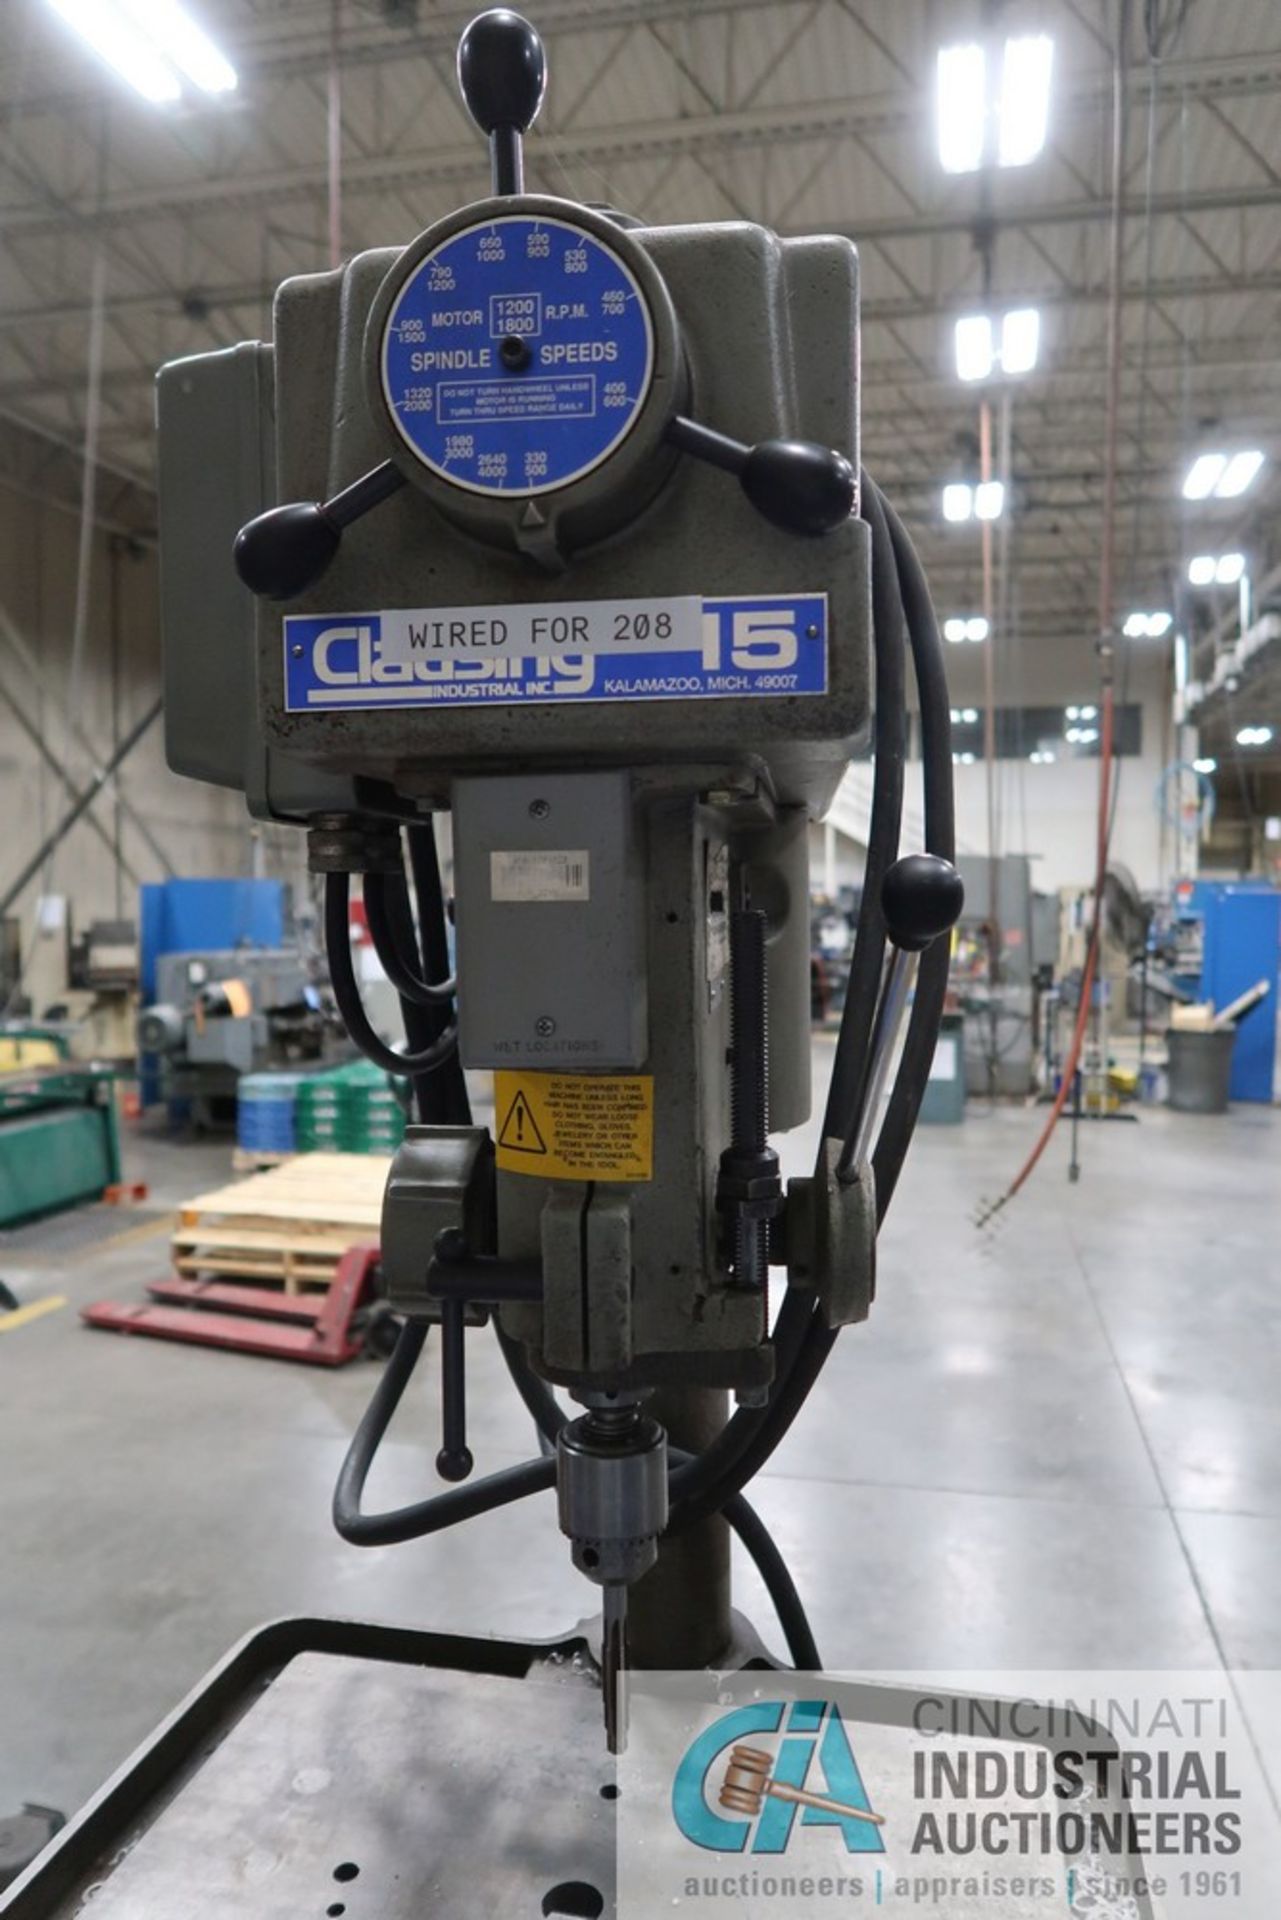 15" CLAUSING MODEL 1765 PRODUCTION TABLE DRILL; S/N 15-535463, 300-4,000 SPINDLE RPMS - Image 4 of 6